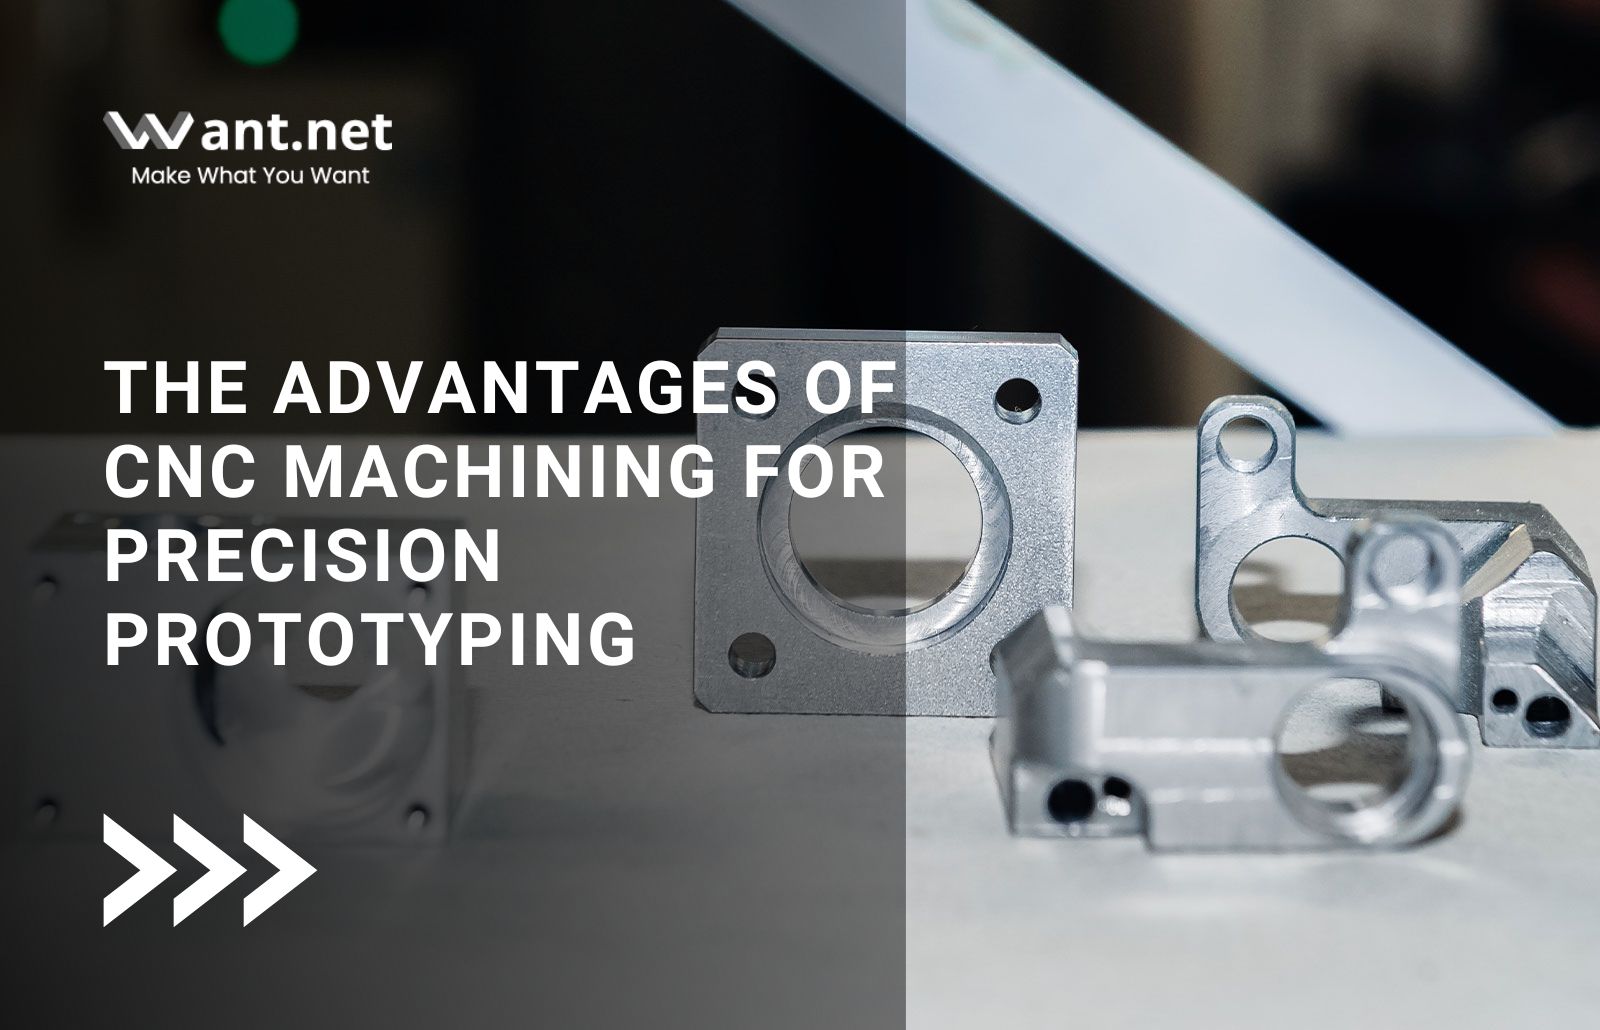 The Advantages of CNC Machining for Precision Prototyping